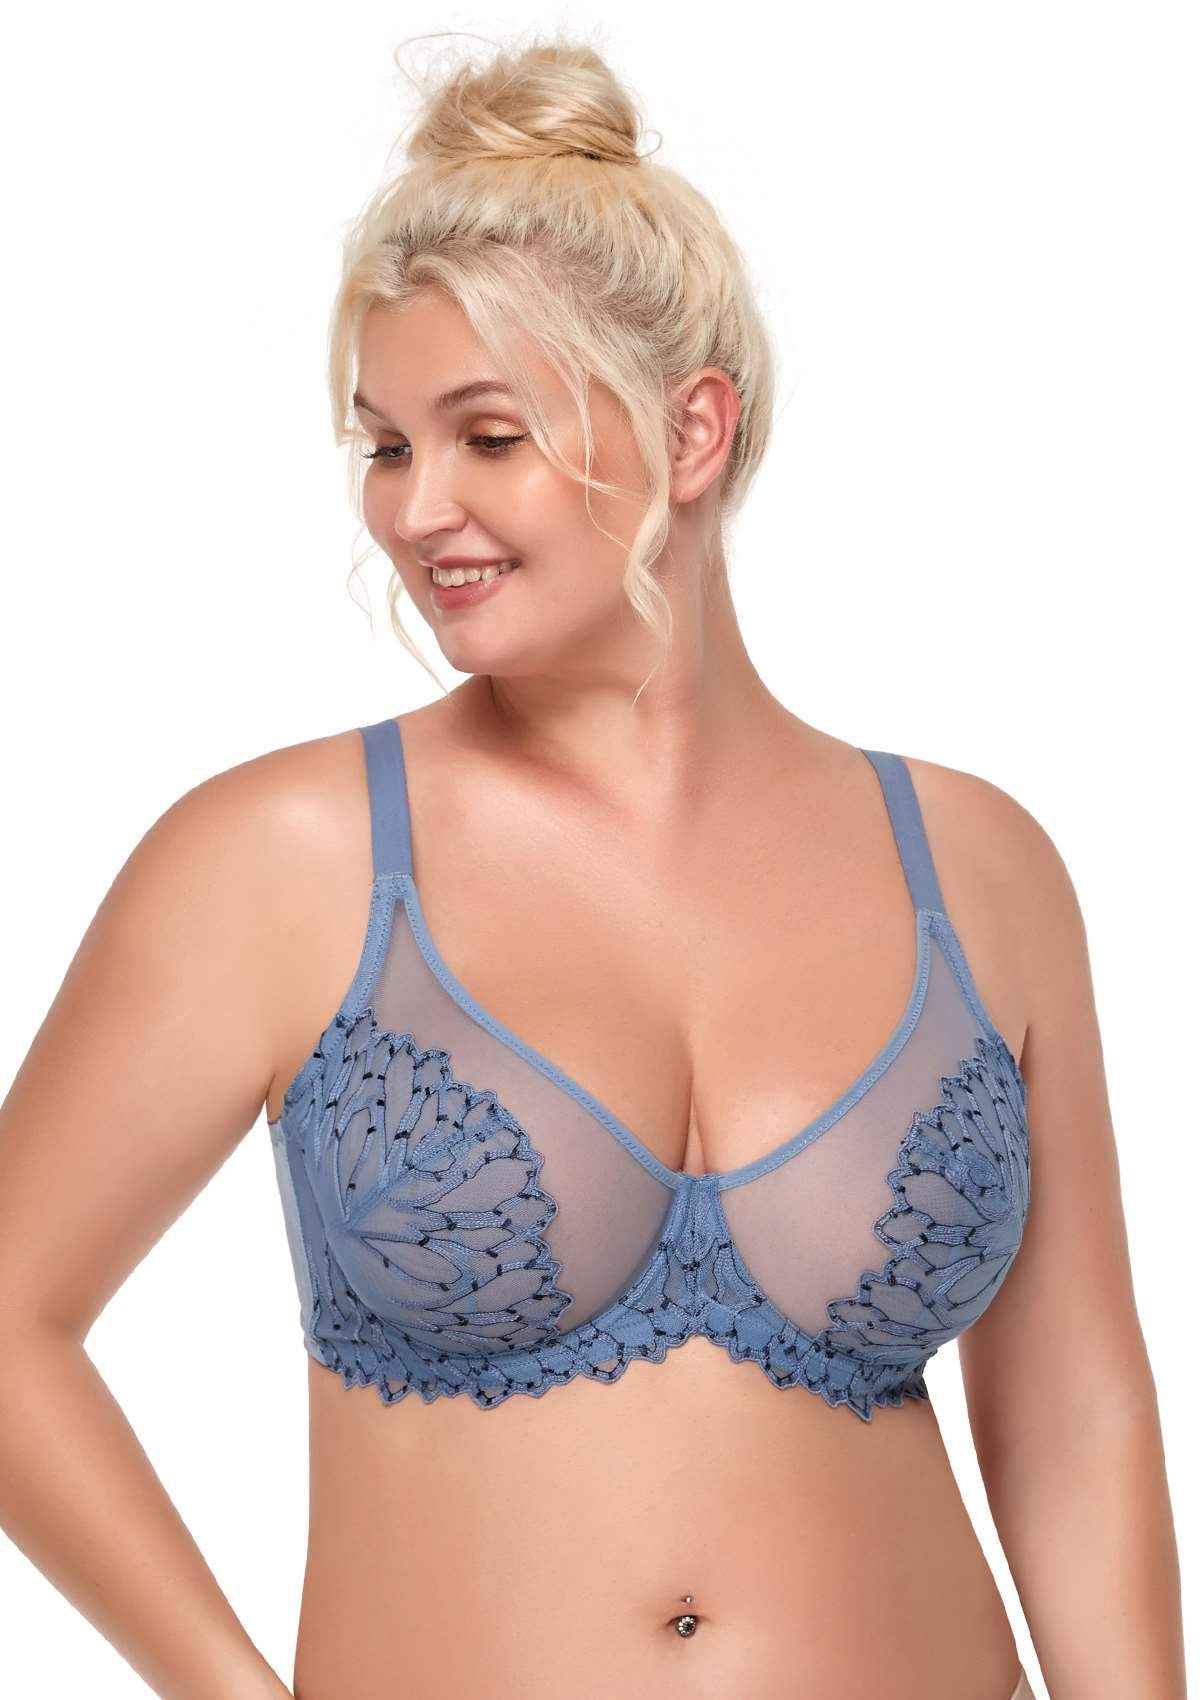 HSIA Chrysanthemum Plus Size Lace Bra: Back Support Bra For Posture - Light Pink / 34 / DD/E